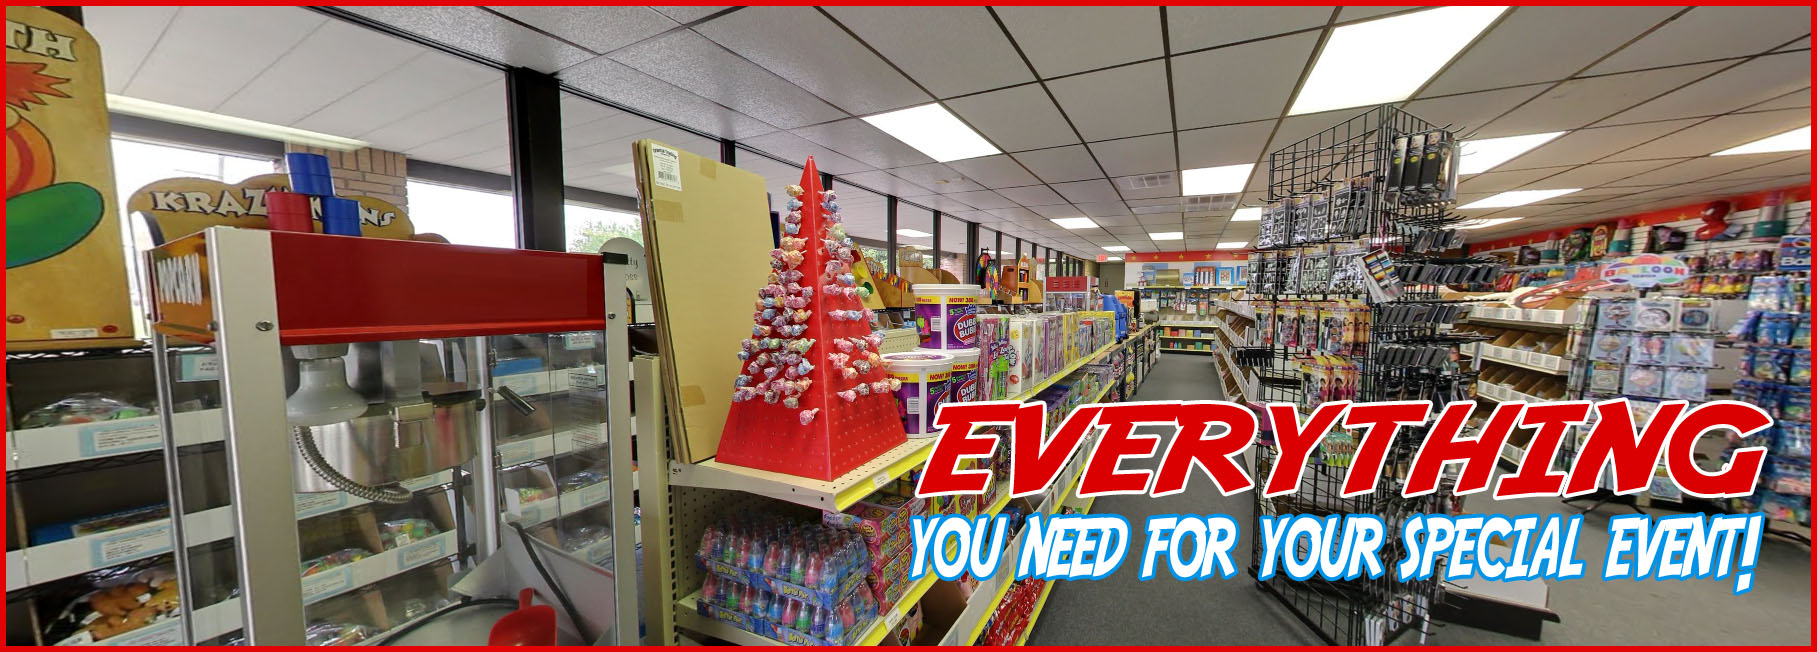 Balloon-n-Novelty, party supplies, special events, carnival supplies, stafford, sugar land, TX